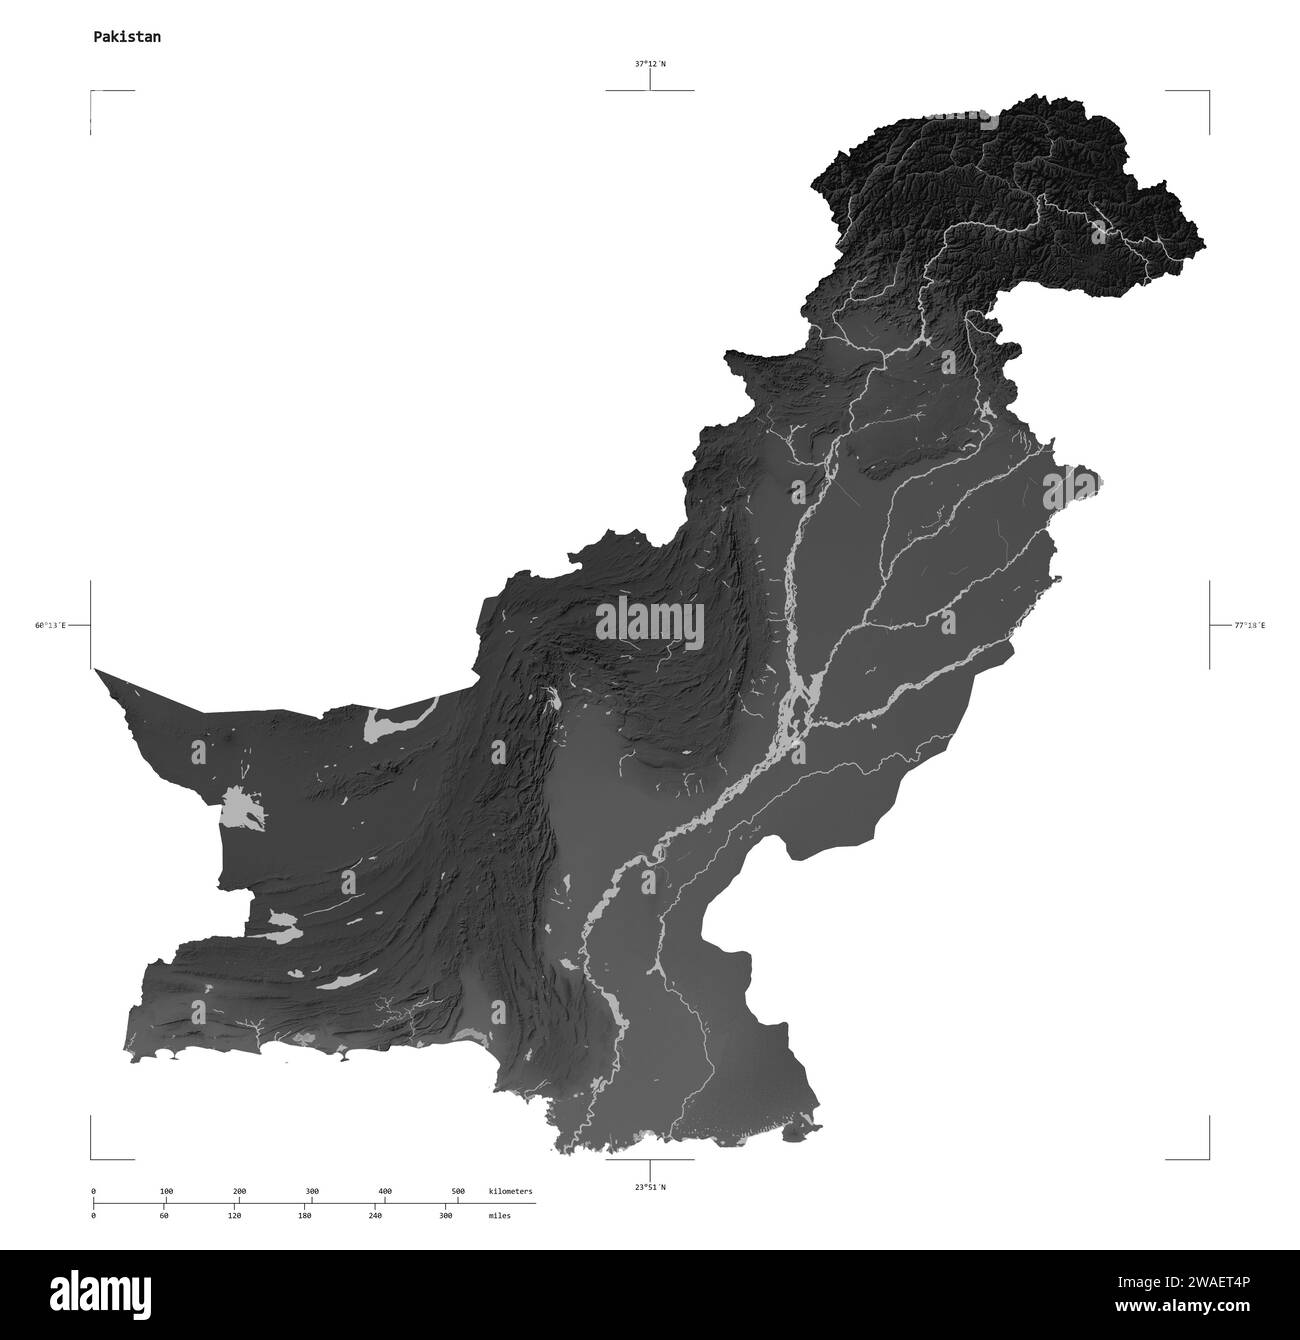 Shape of a Grayscale elevation map with lakes and rivers of the Pakistan, with distance scale and map border coordinates, isolated on white Stock Photo